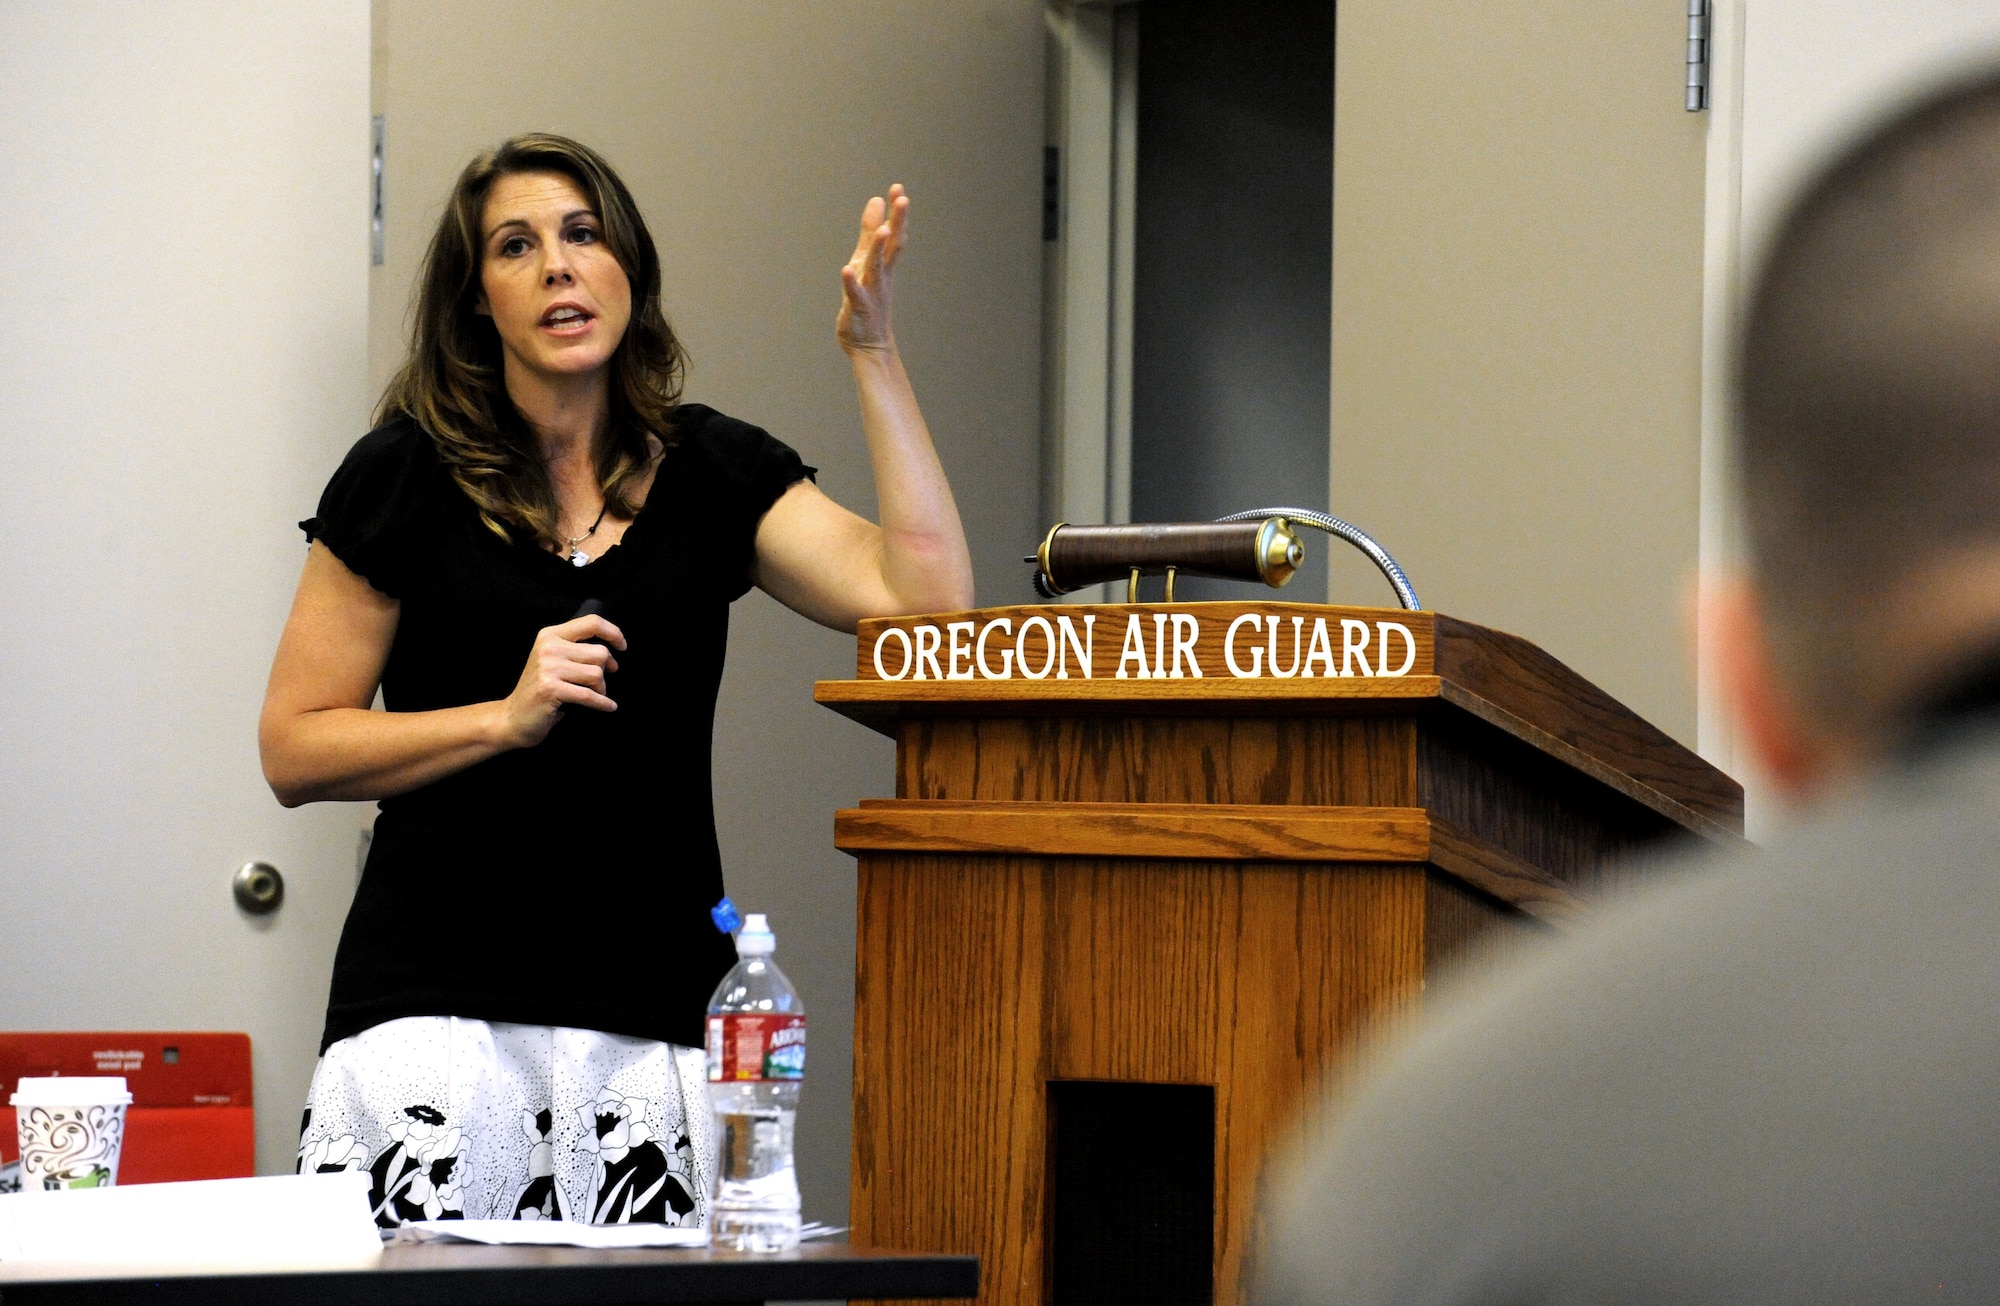 Kelly Dominici, from the Portland Veterans Administration Medical Center in Vancouver, Washington, answers questions from  victim during three days of training for Sexual Assault Preventing and Response (SAPR) training, June 24-26, Portland Air National Guard Base, Ore. (U.S. Air National Guard photo by Tech. Sgt. John Hughel, 142nd Fighter Wing Public Affairs/Released)